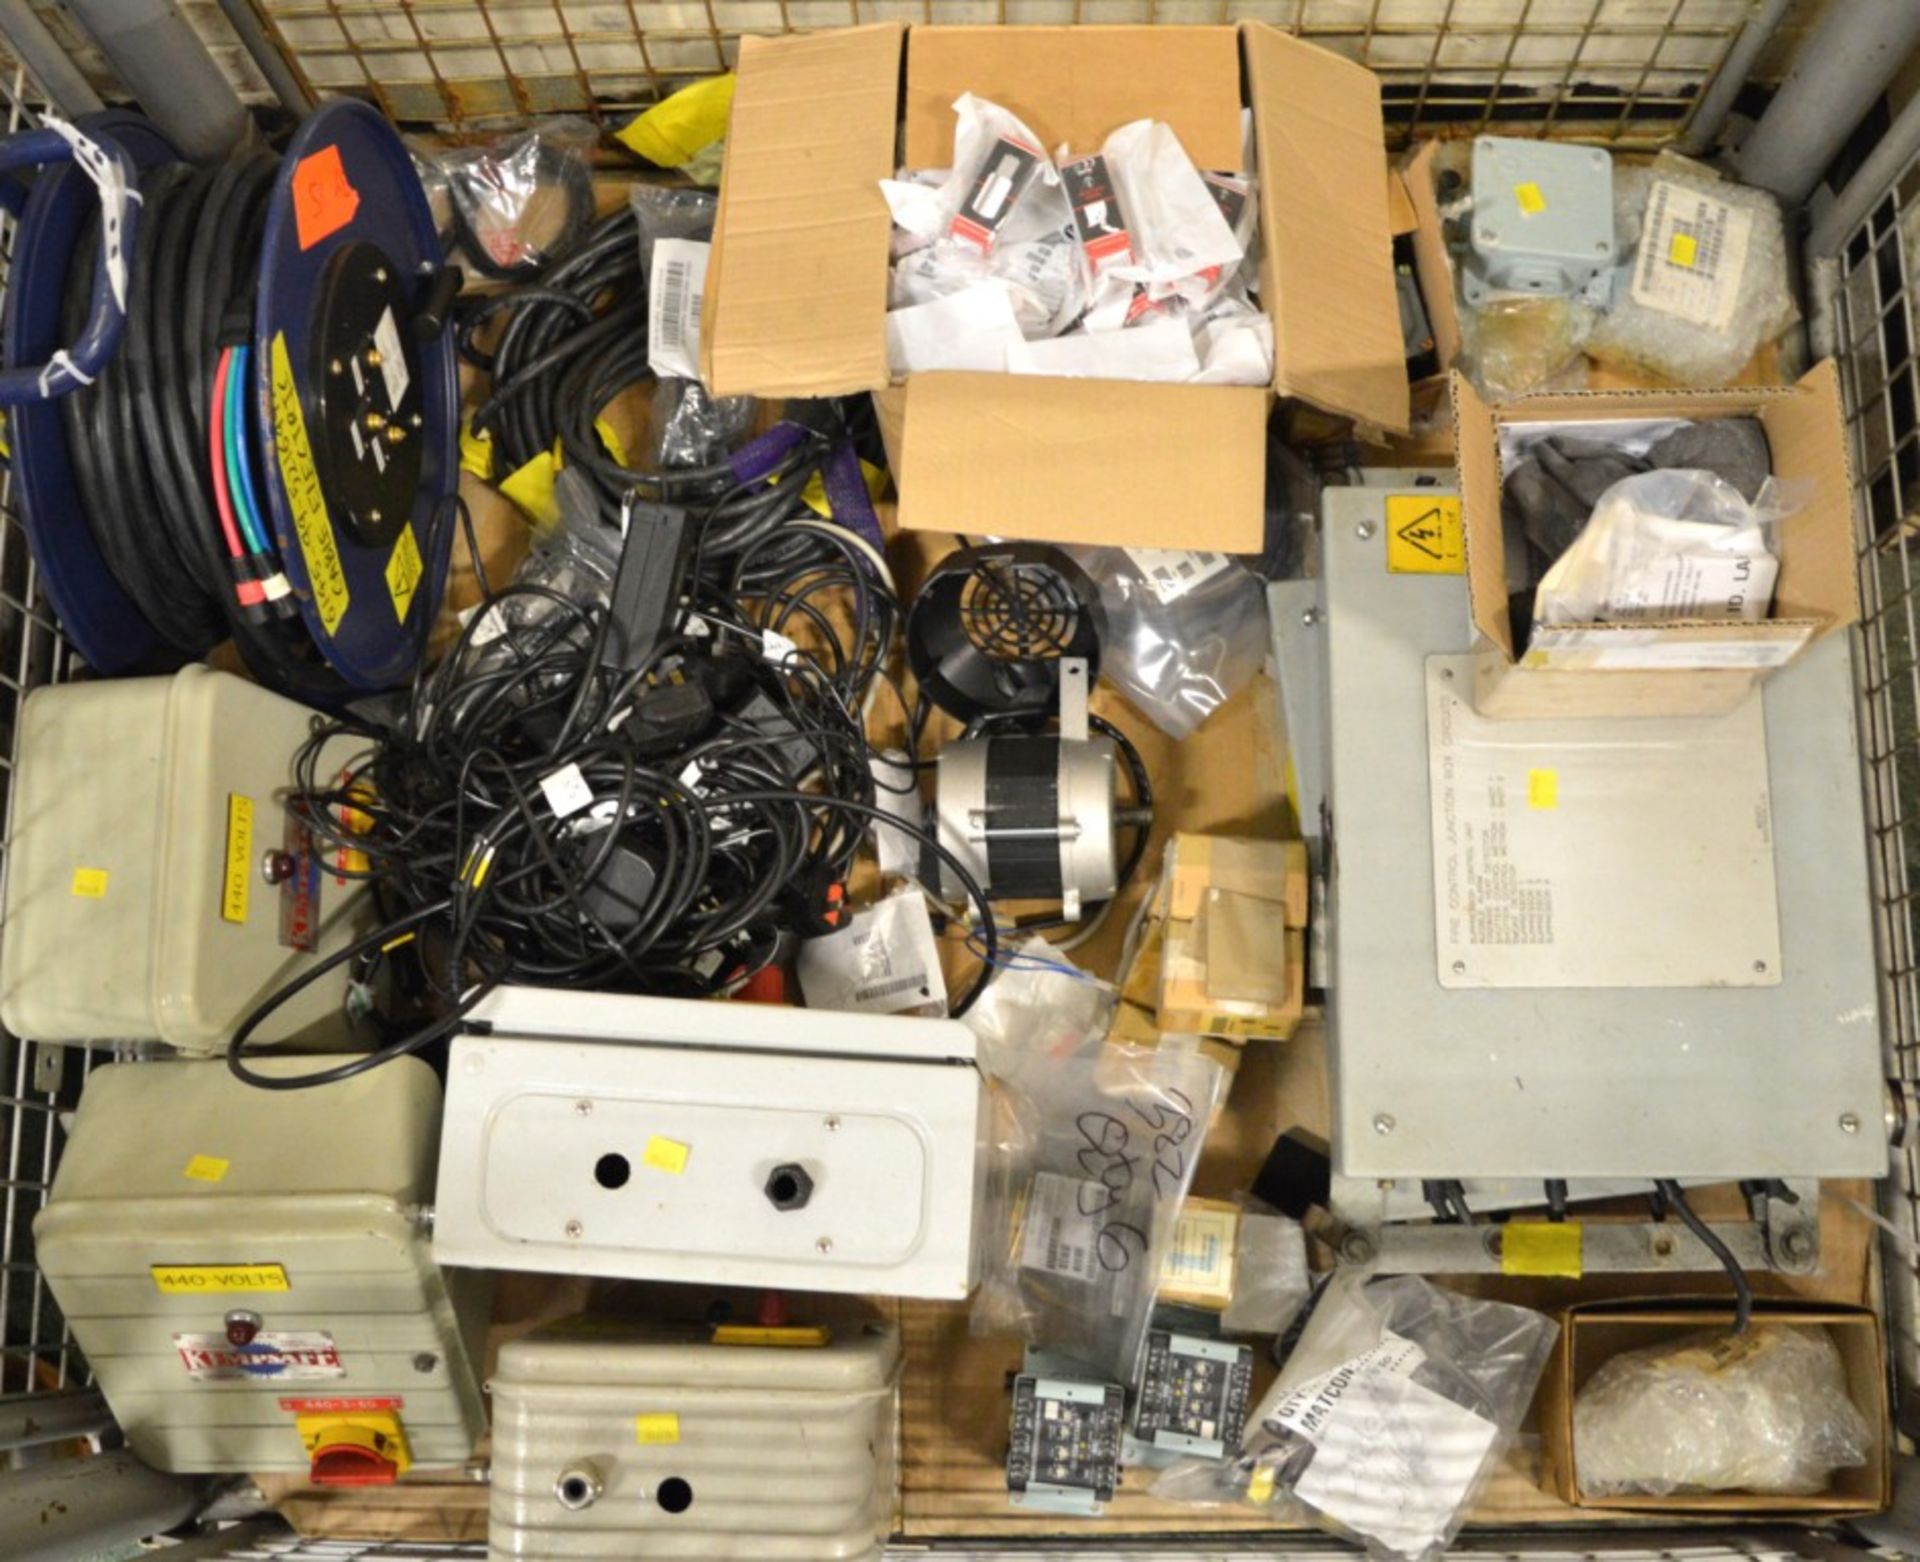 Electrical units, Lamps, Fuse Cartridges, Circuit Breaker. Switches, CVR Microphone, Plug - Image 2 of 2